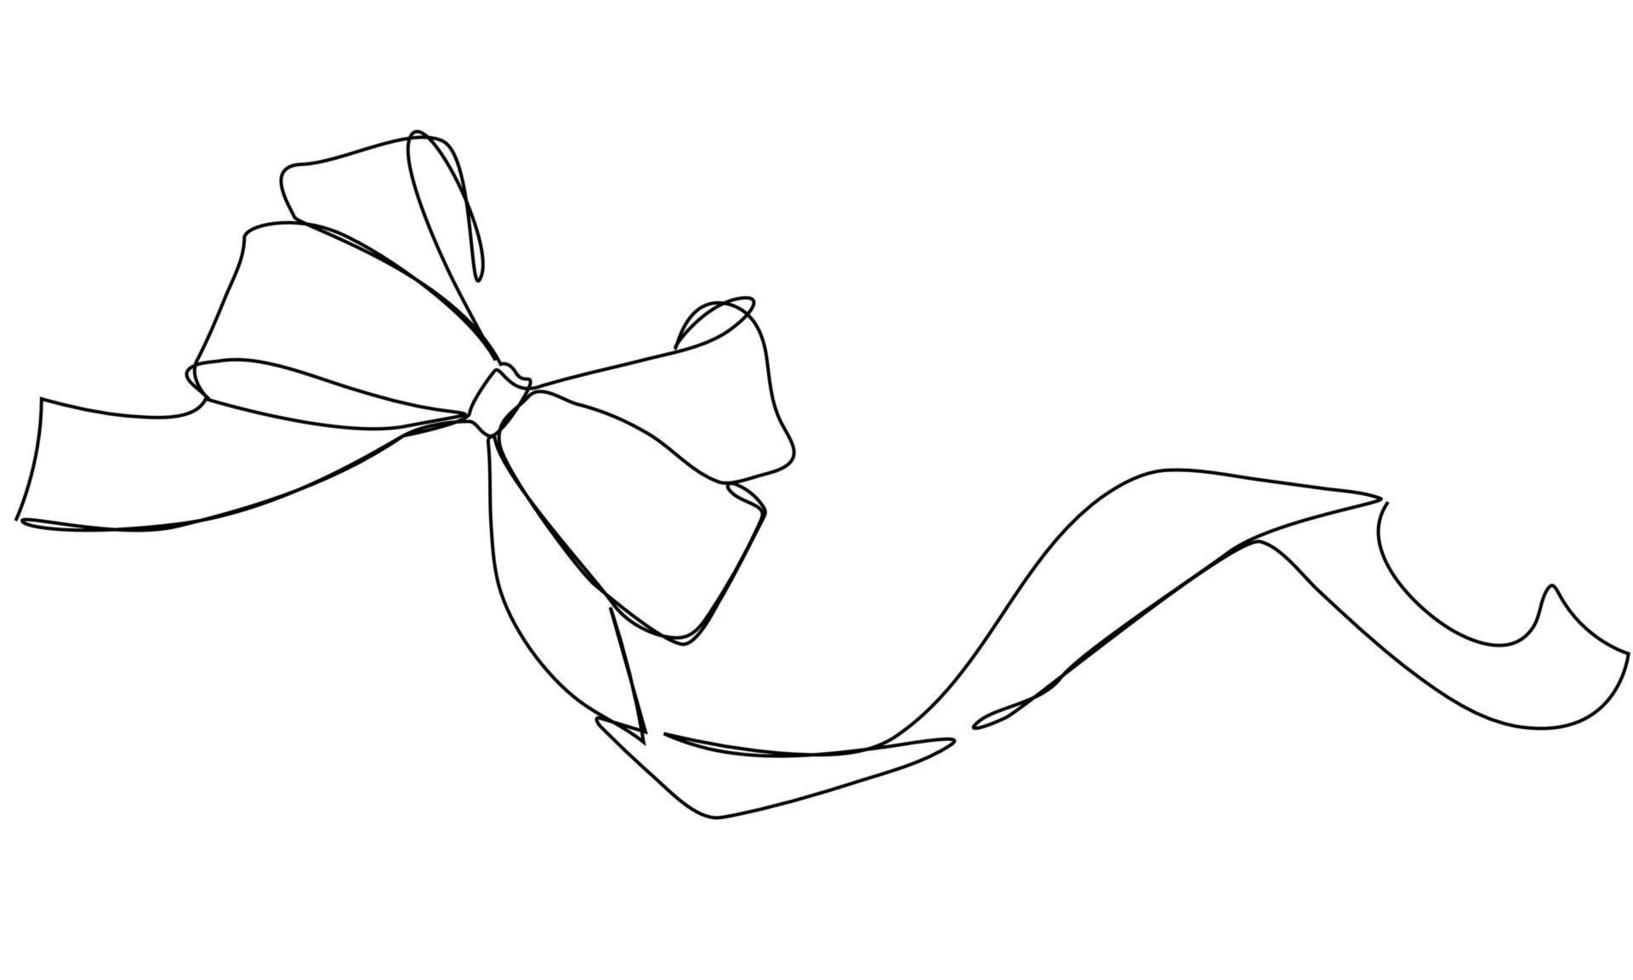 Gift ribbon bow in simple continuous line drawing style. vector